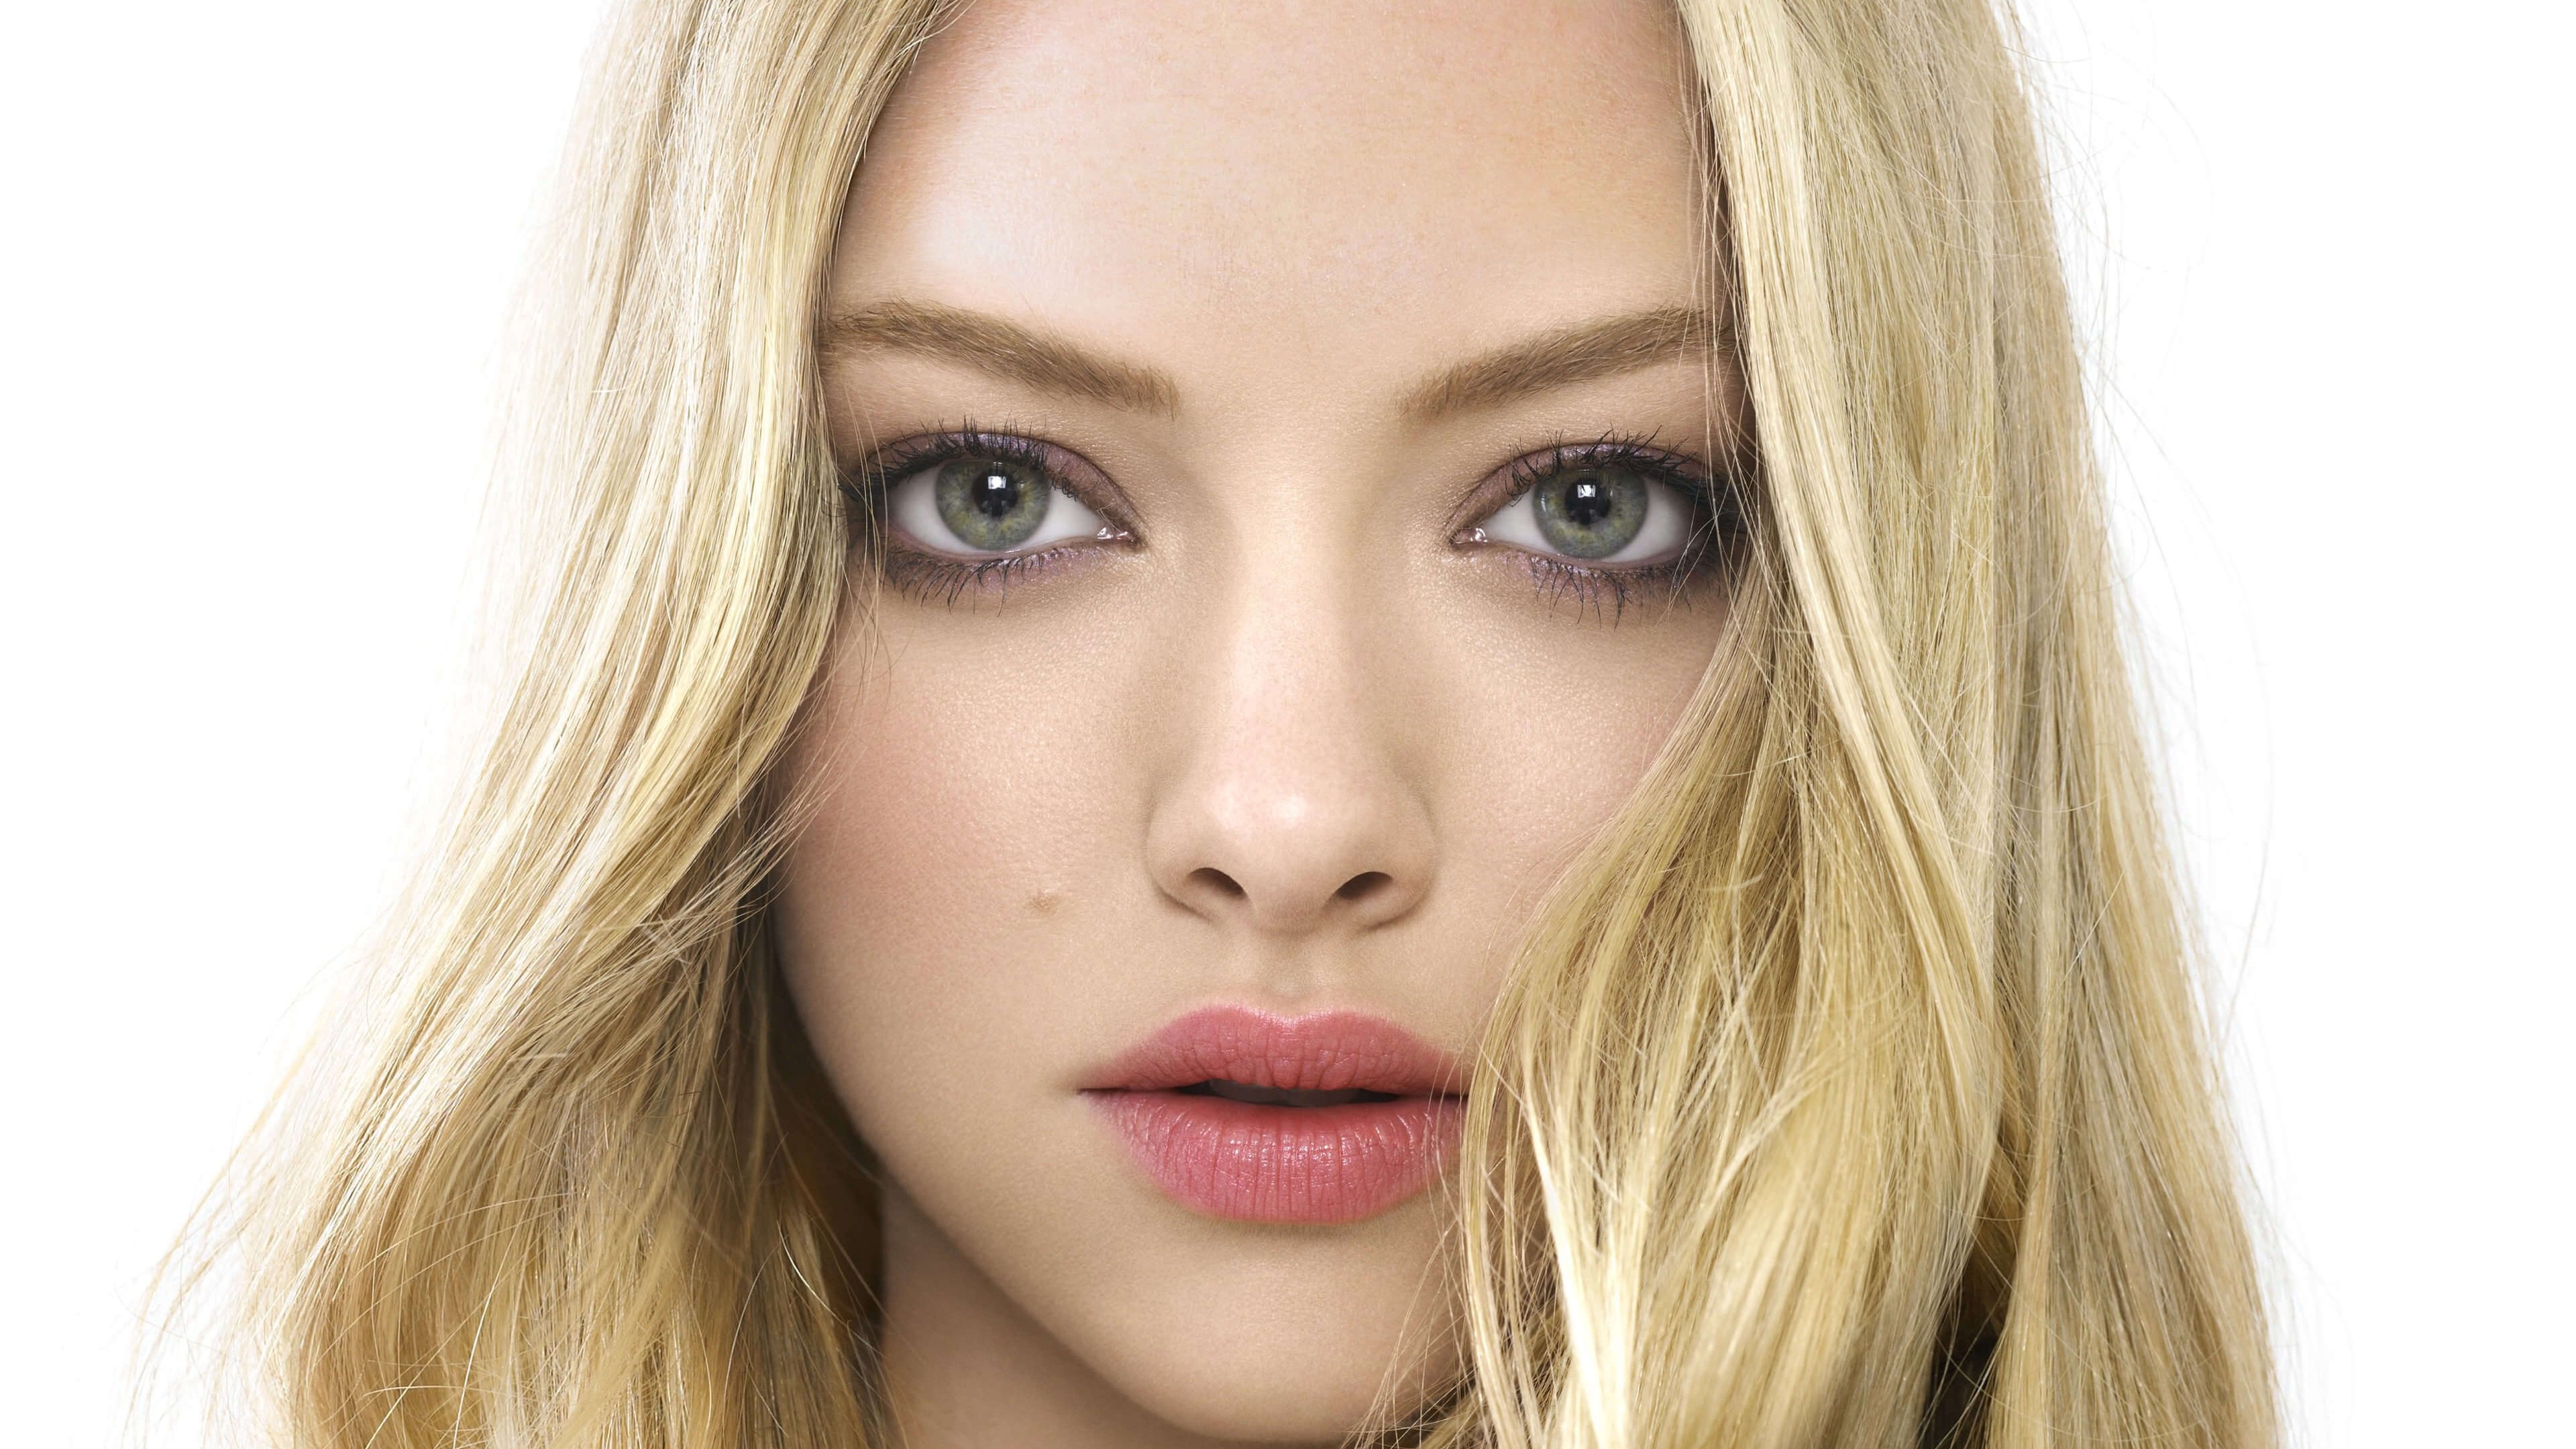 Amanda Seyfried For Vogue Wallpapers